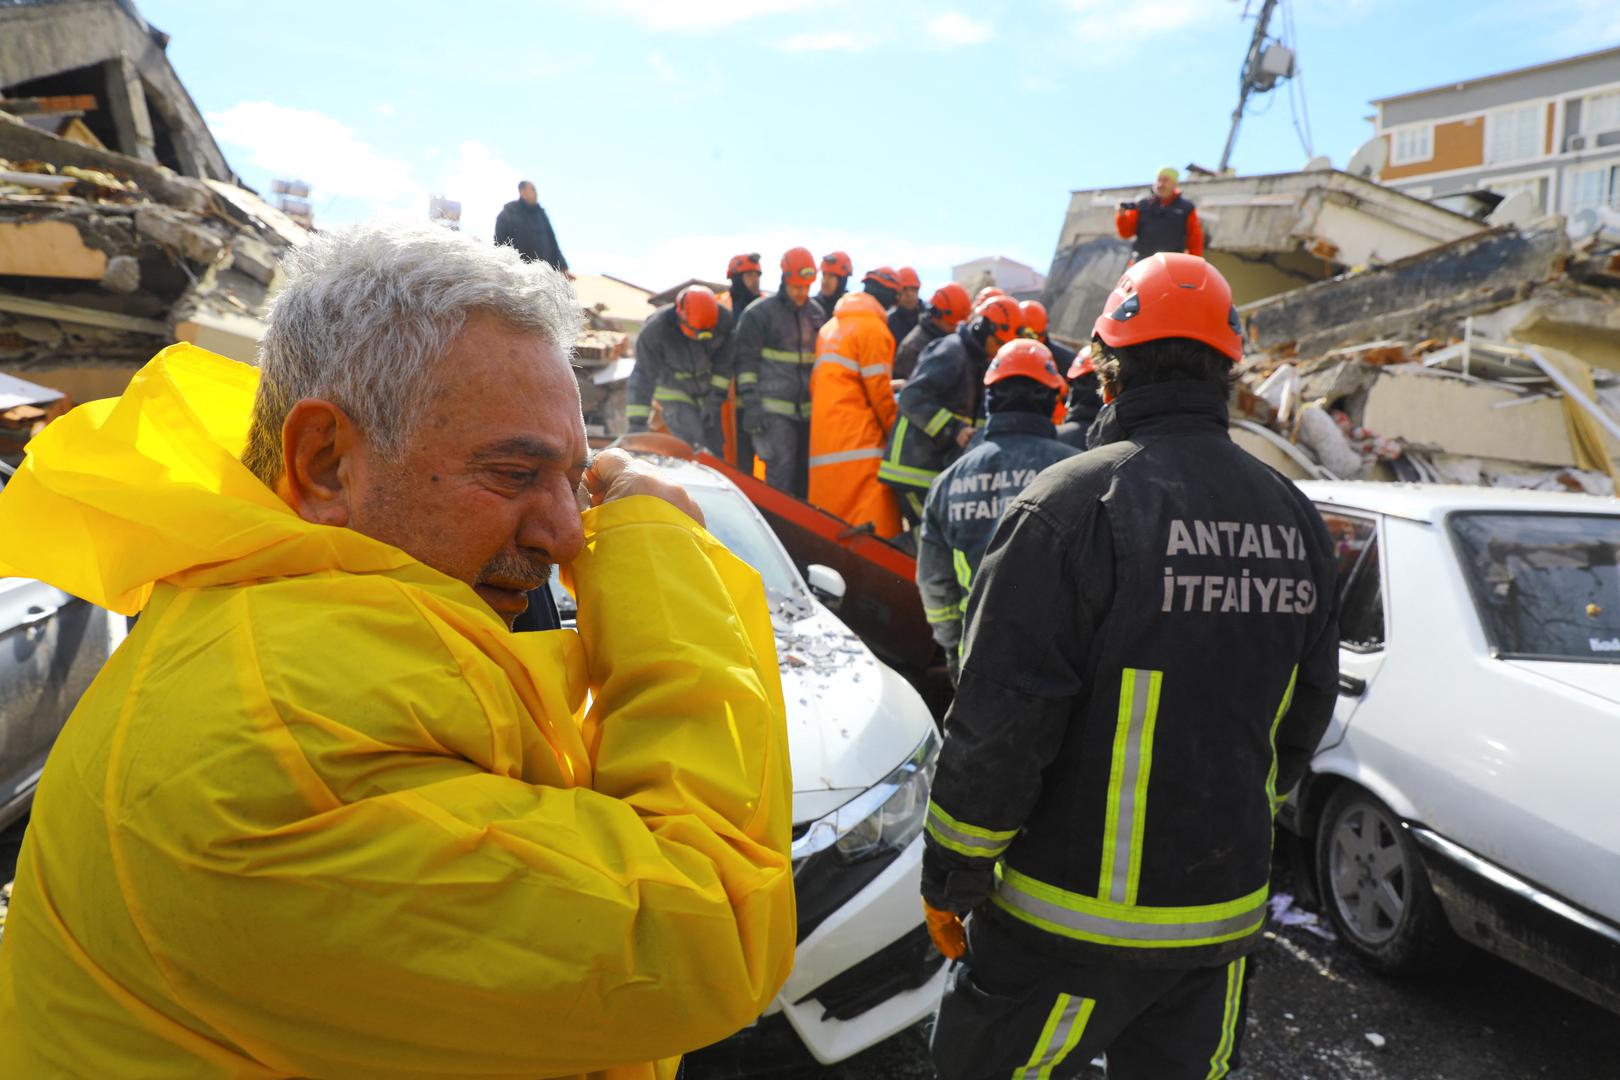 Rescue team members save a victim from the ruins of a collapsed building in Adana, south Turkey, February 7, 2023. A powerful earthquake has hit a wide area in south-eastern Turkey, near the Syrian border, killing more than 7000 people and trapping many others. Photo by Depo Photos/ABACAPRESS.COM Photo: Depo Photos/ABACA/ABACA